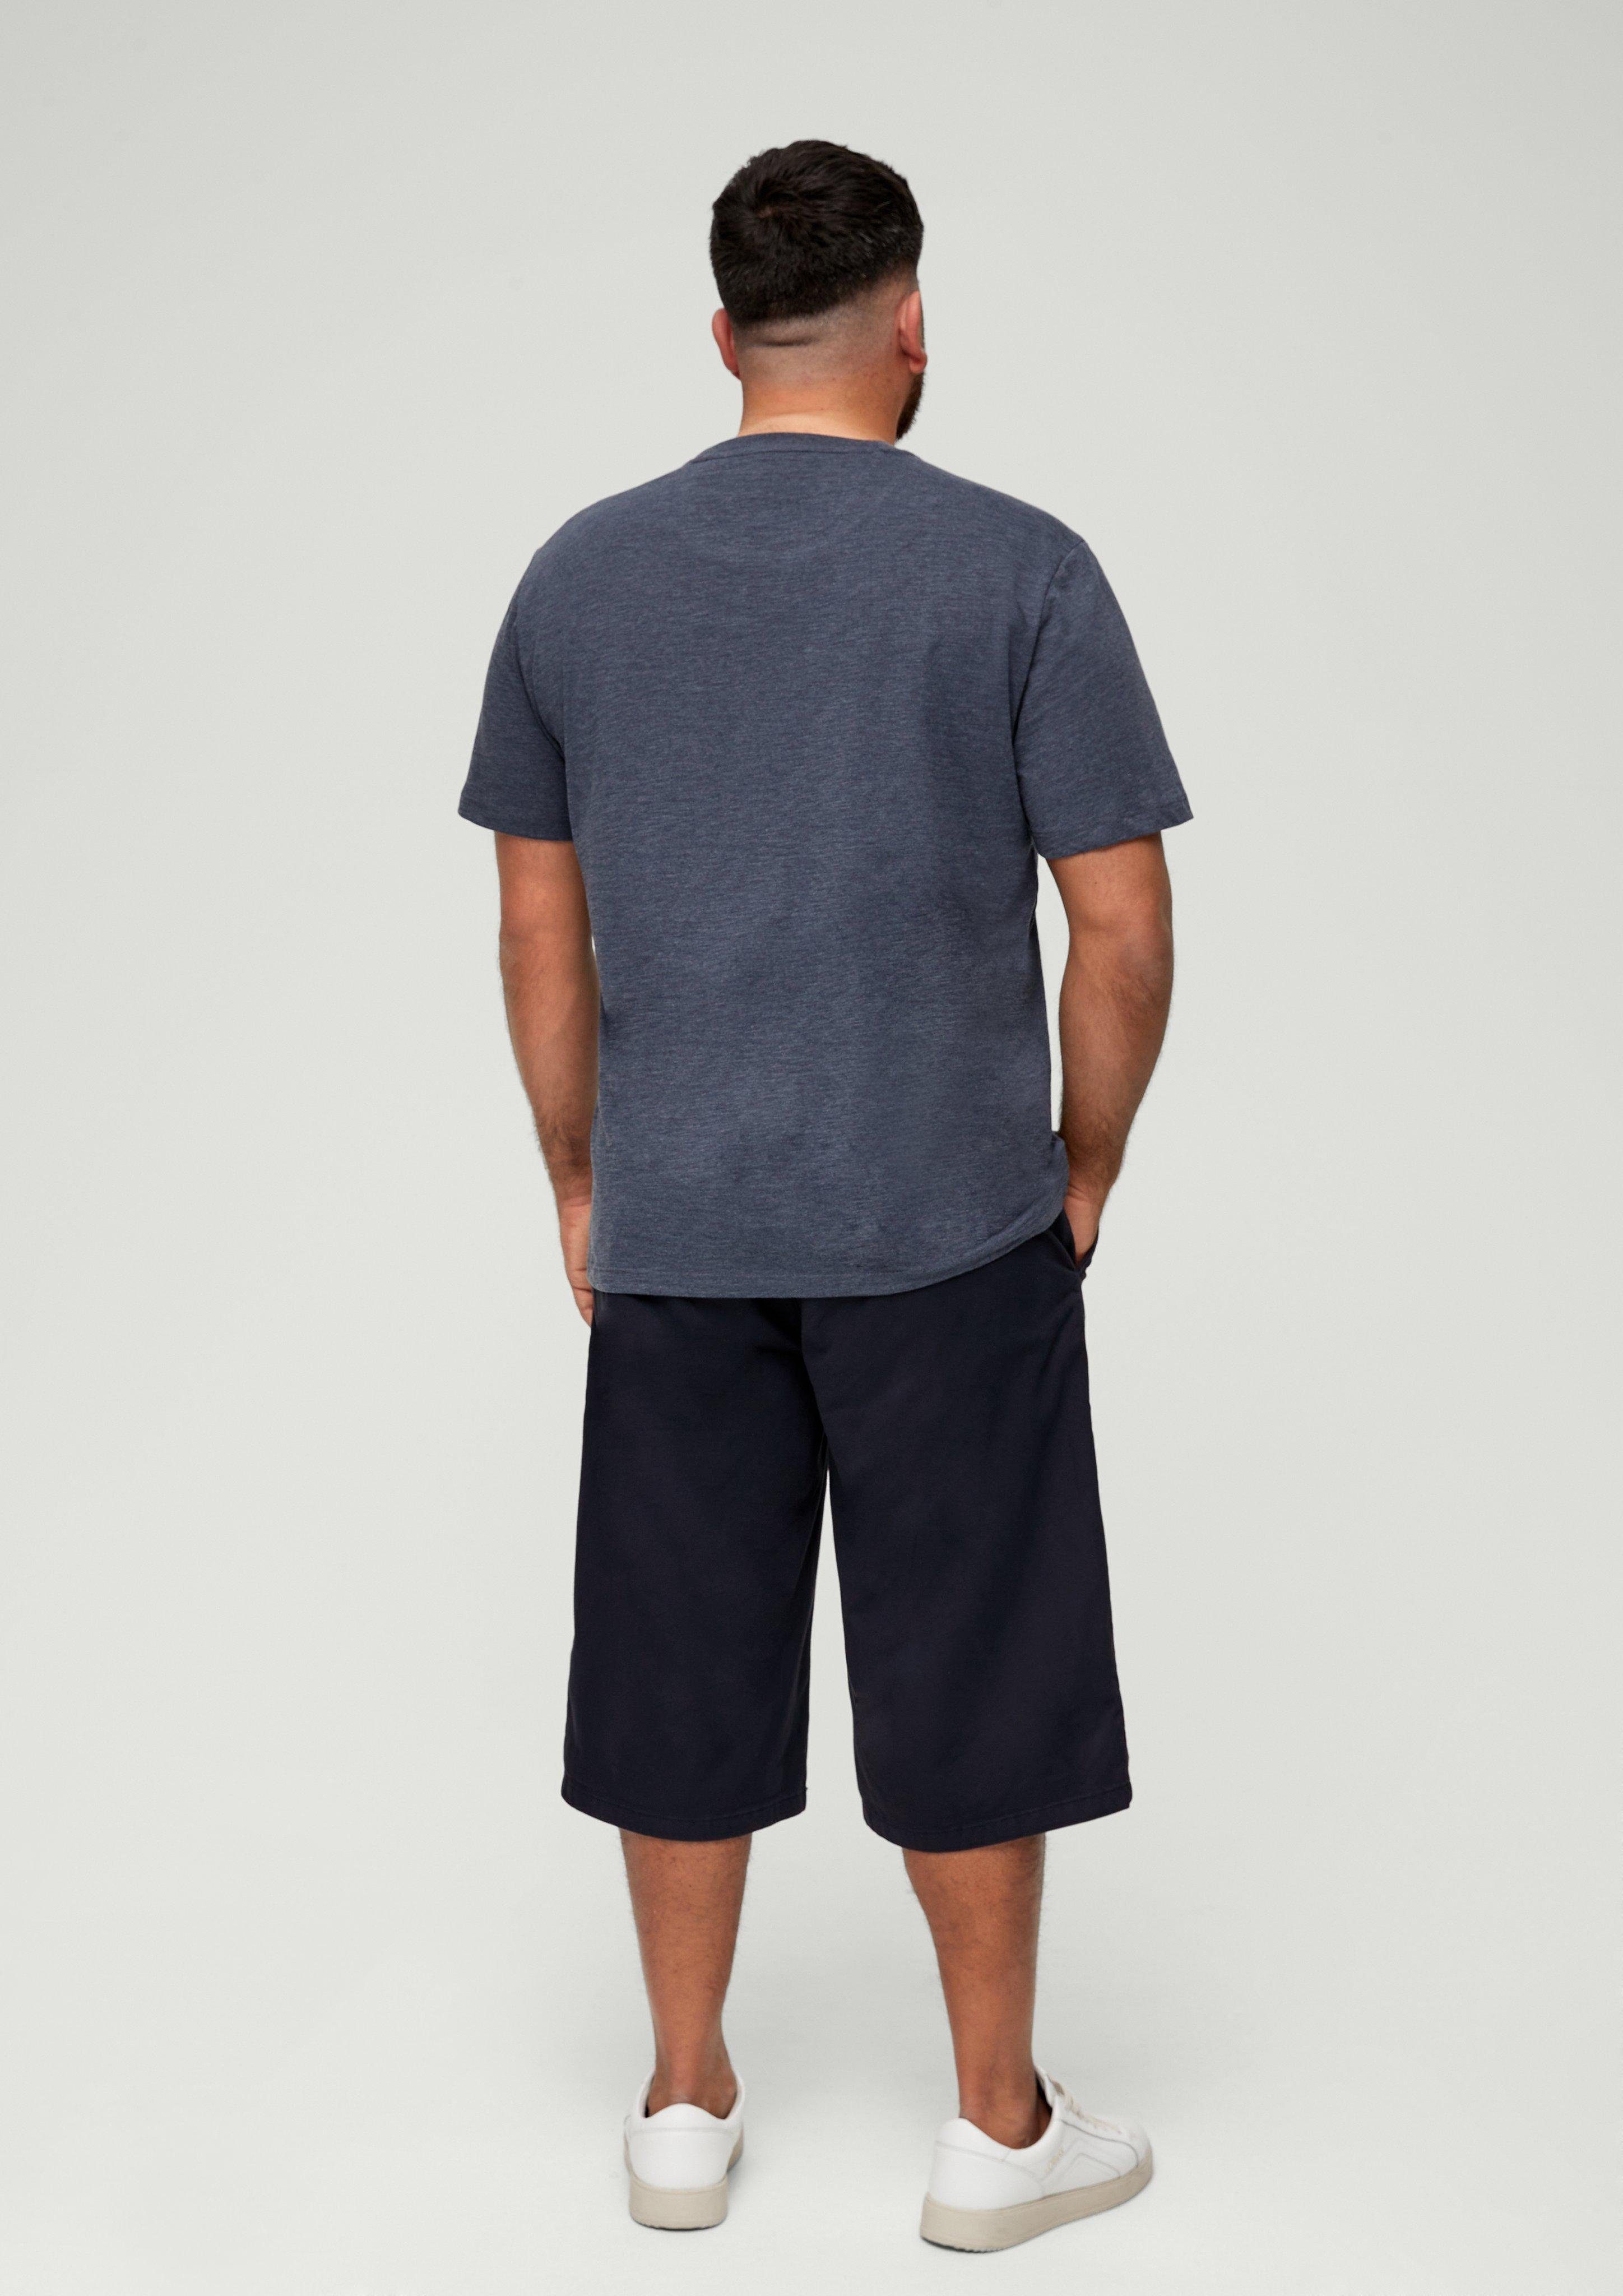 s.Oliver navy mit Relaxed: Stoffhose Bermuda Tunnelzug